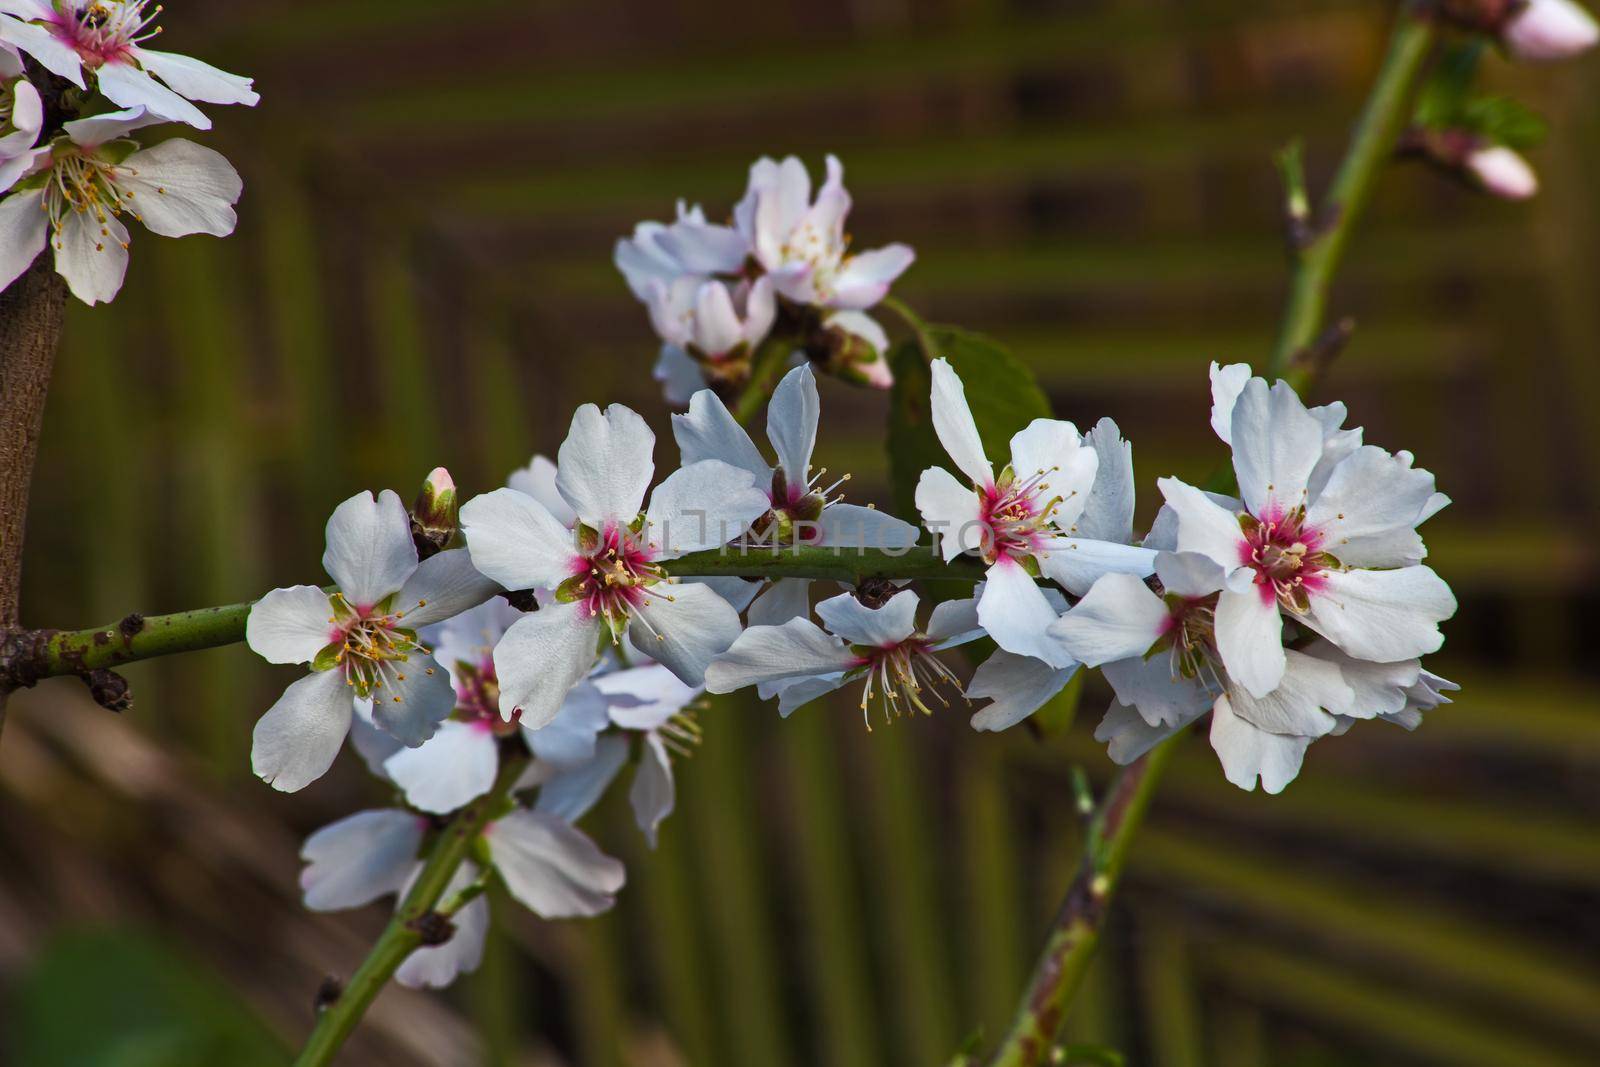 Almond Blossoms 8831 by kobus_peche